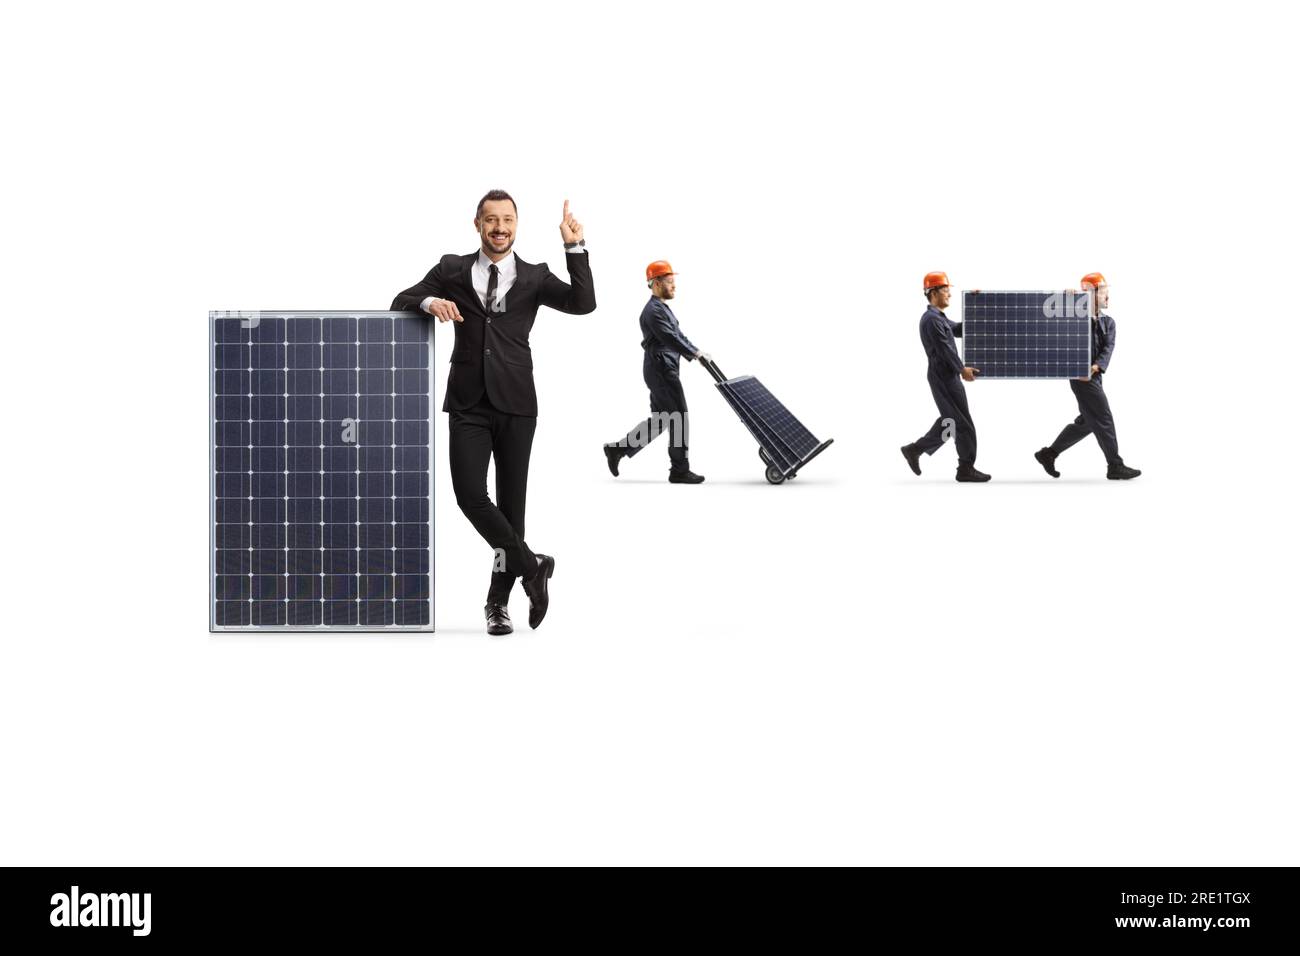 Businesswman pointing up and workers carrying photovoltaic panels isolated on white background Stock Photo